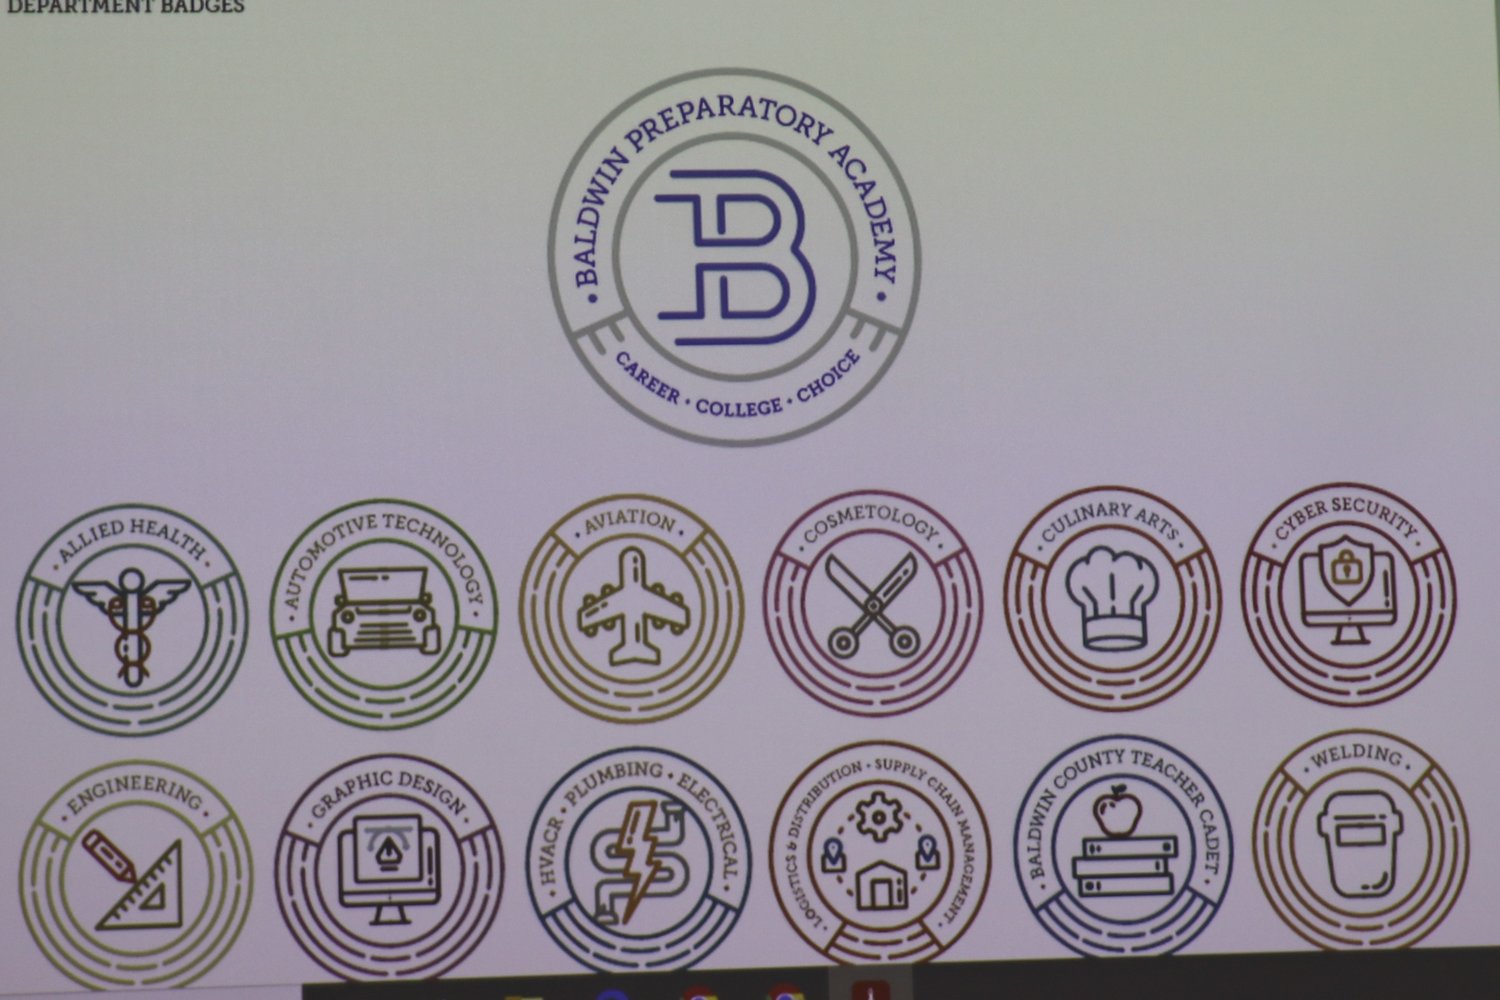 Designs were revealed showing badges that will be worn by students attending Baldwin Preparatory Academy. Students will be assigned specific badges reflecting their industry of choice.